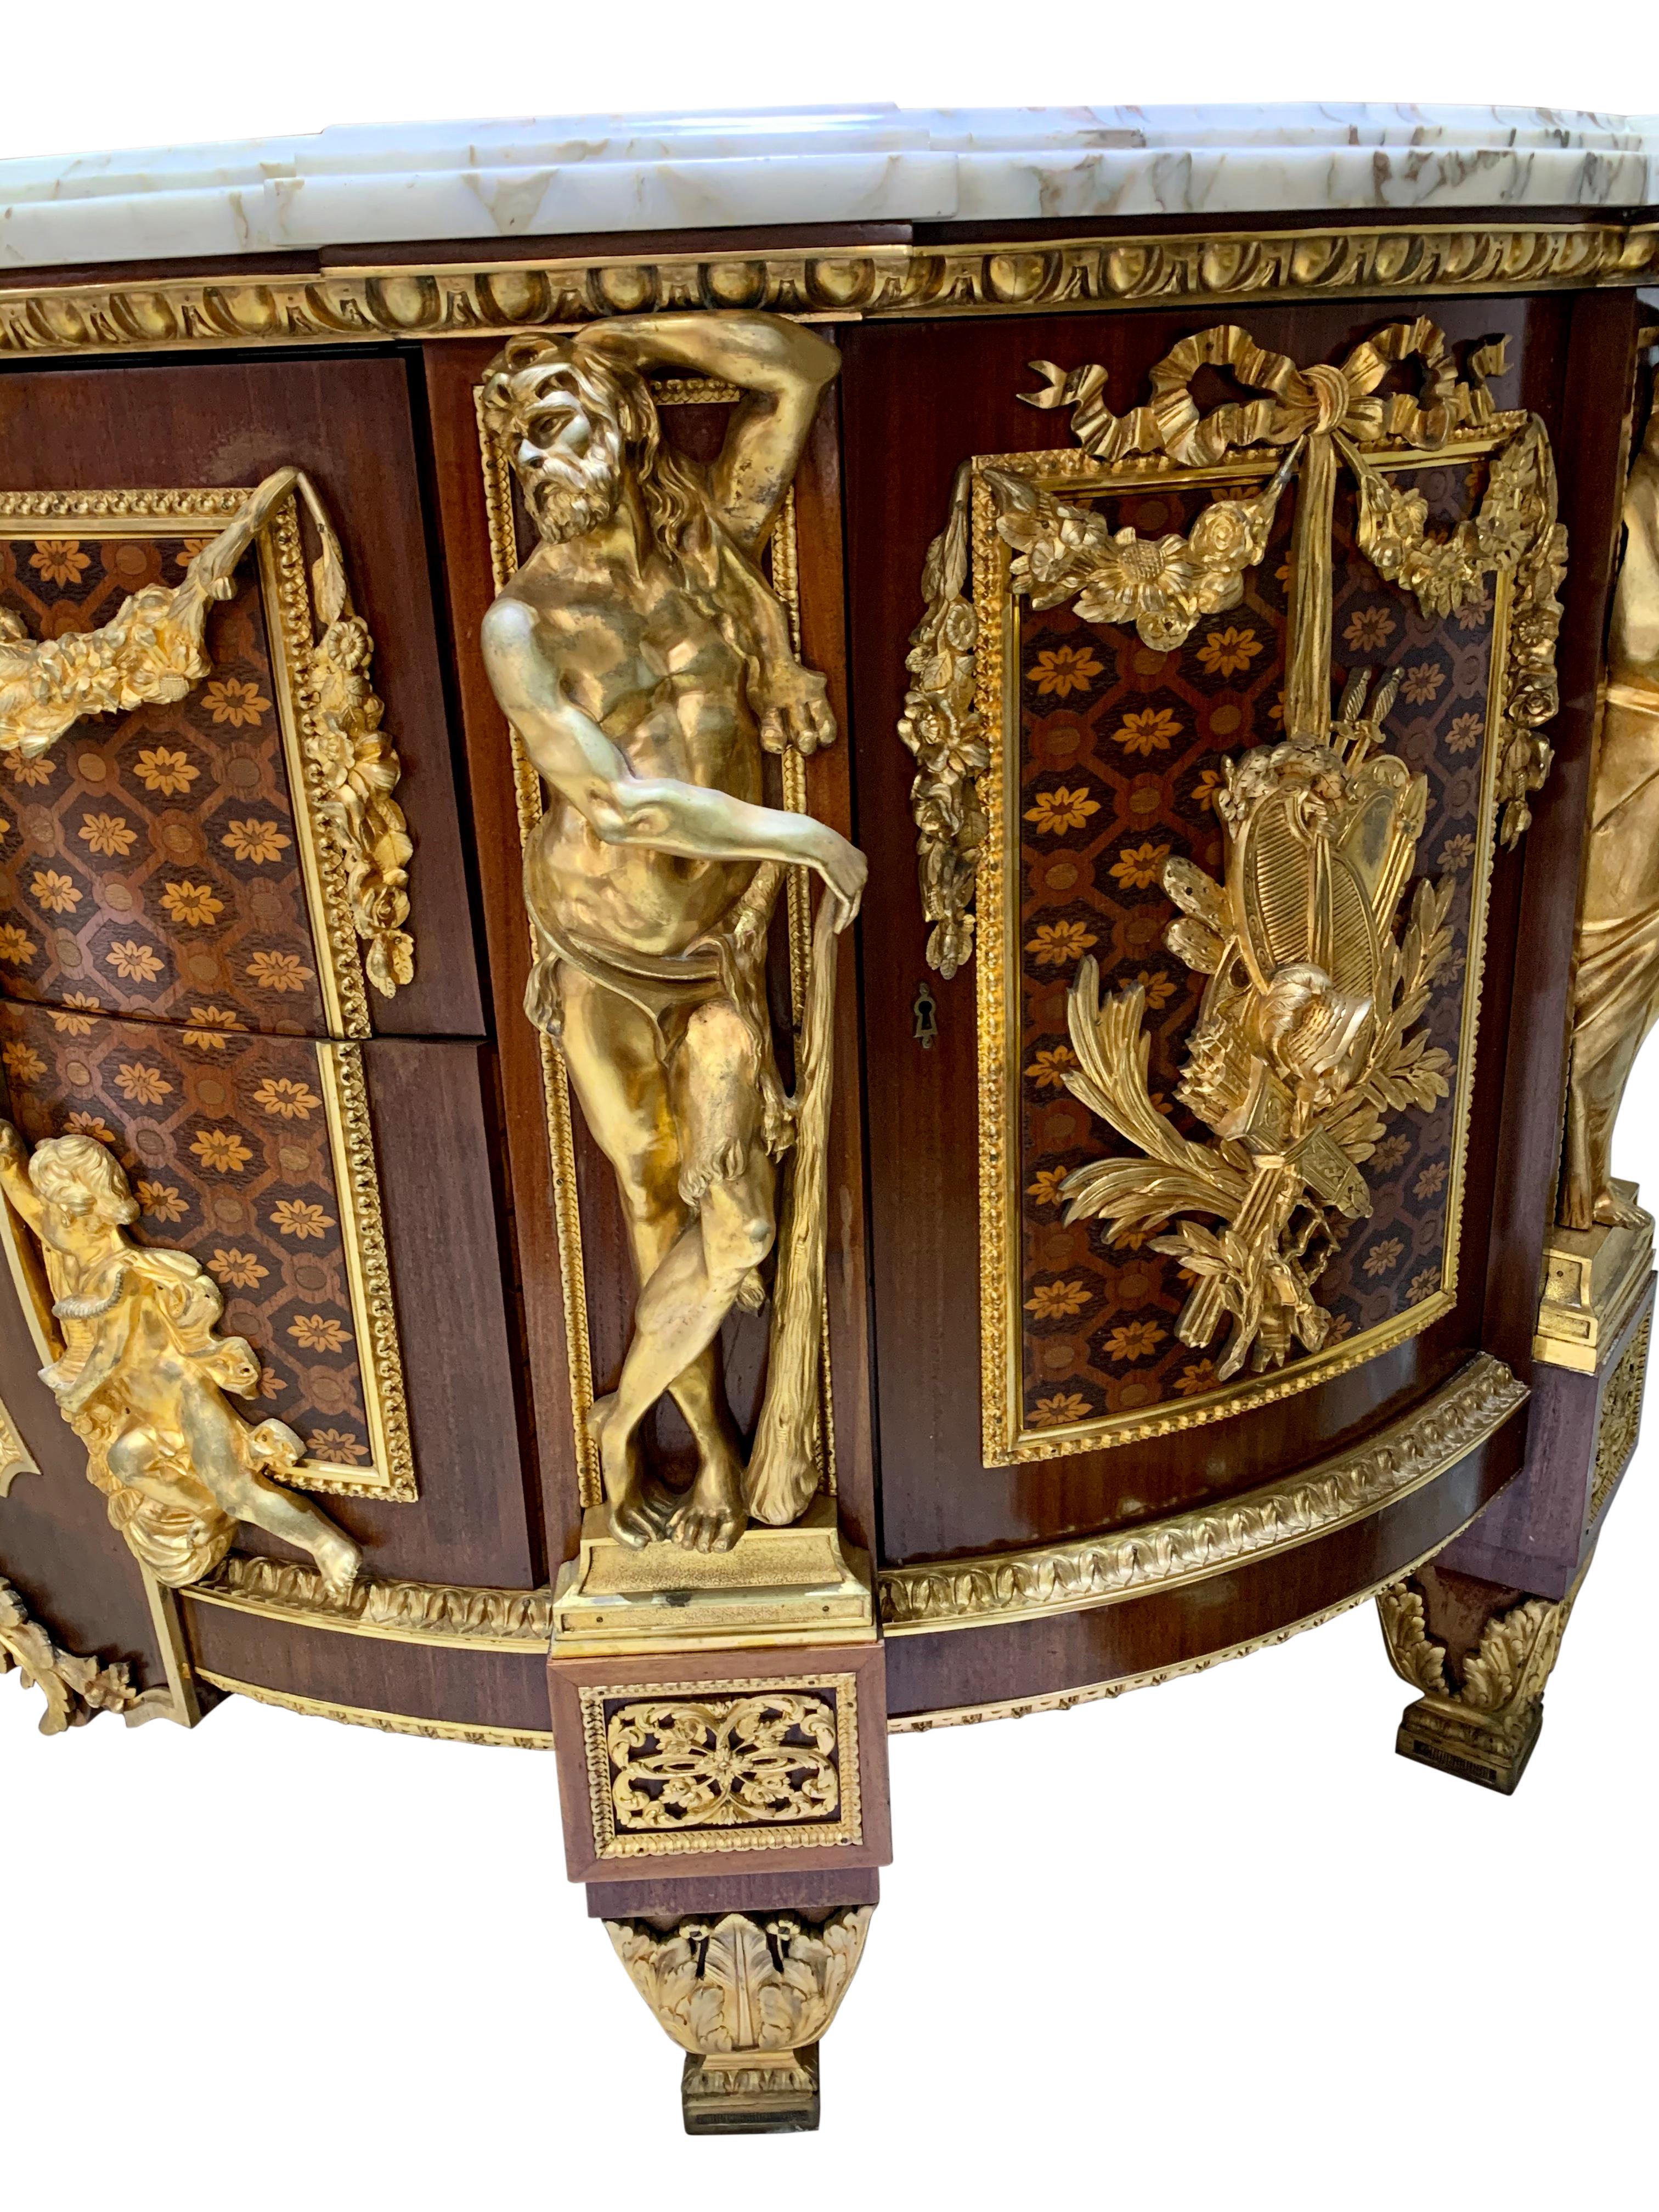 Louis XVI 19th Century French Gilt-Bronze Mounted Commode after Jean-Henri Riesener For Sale